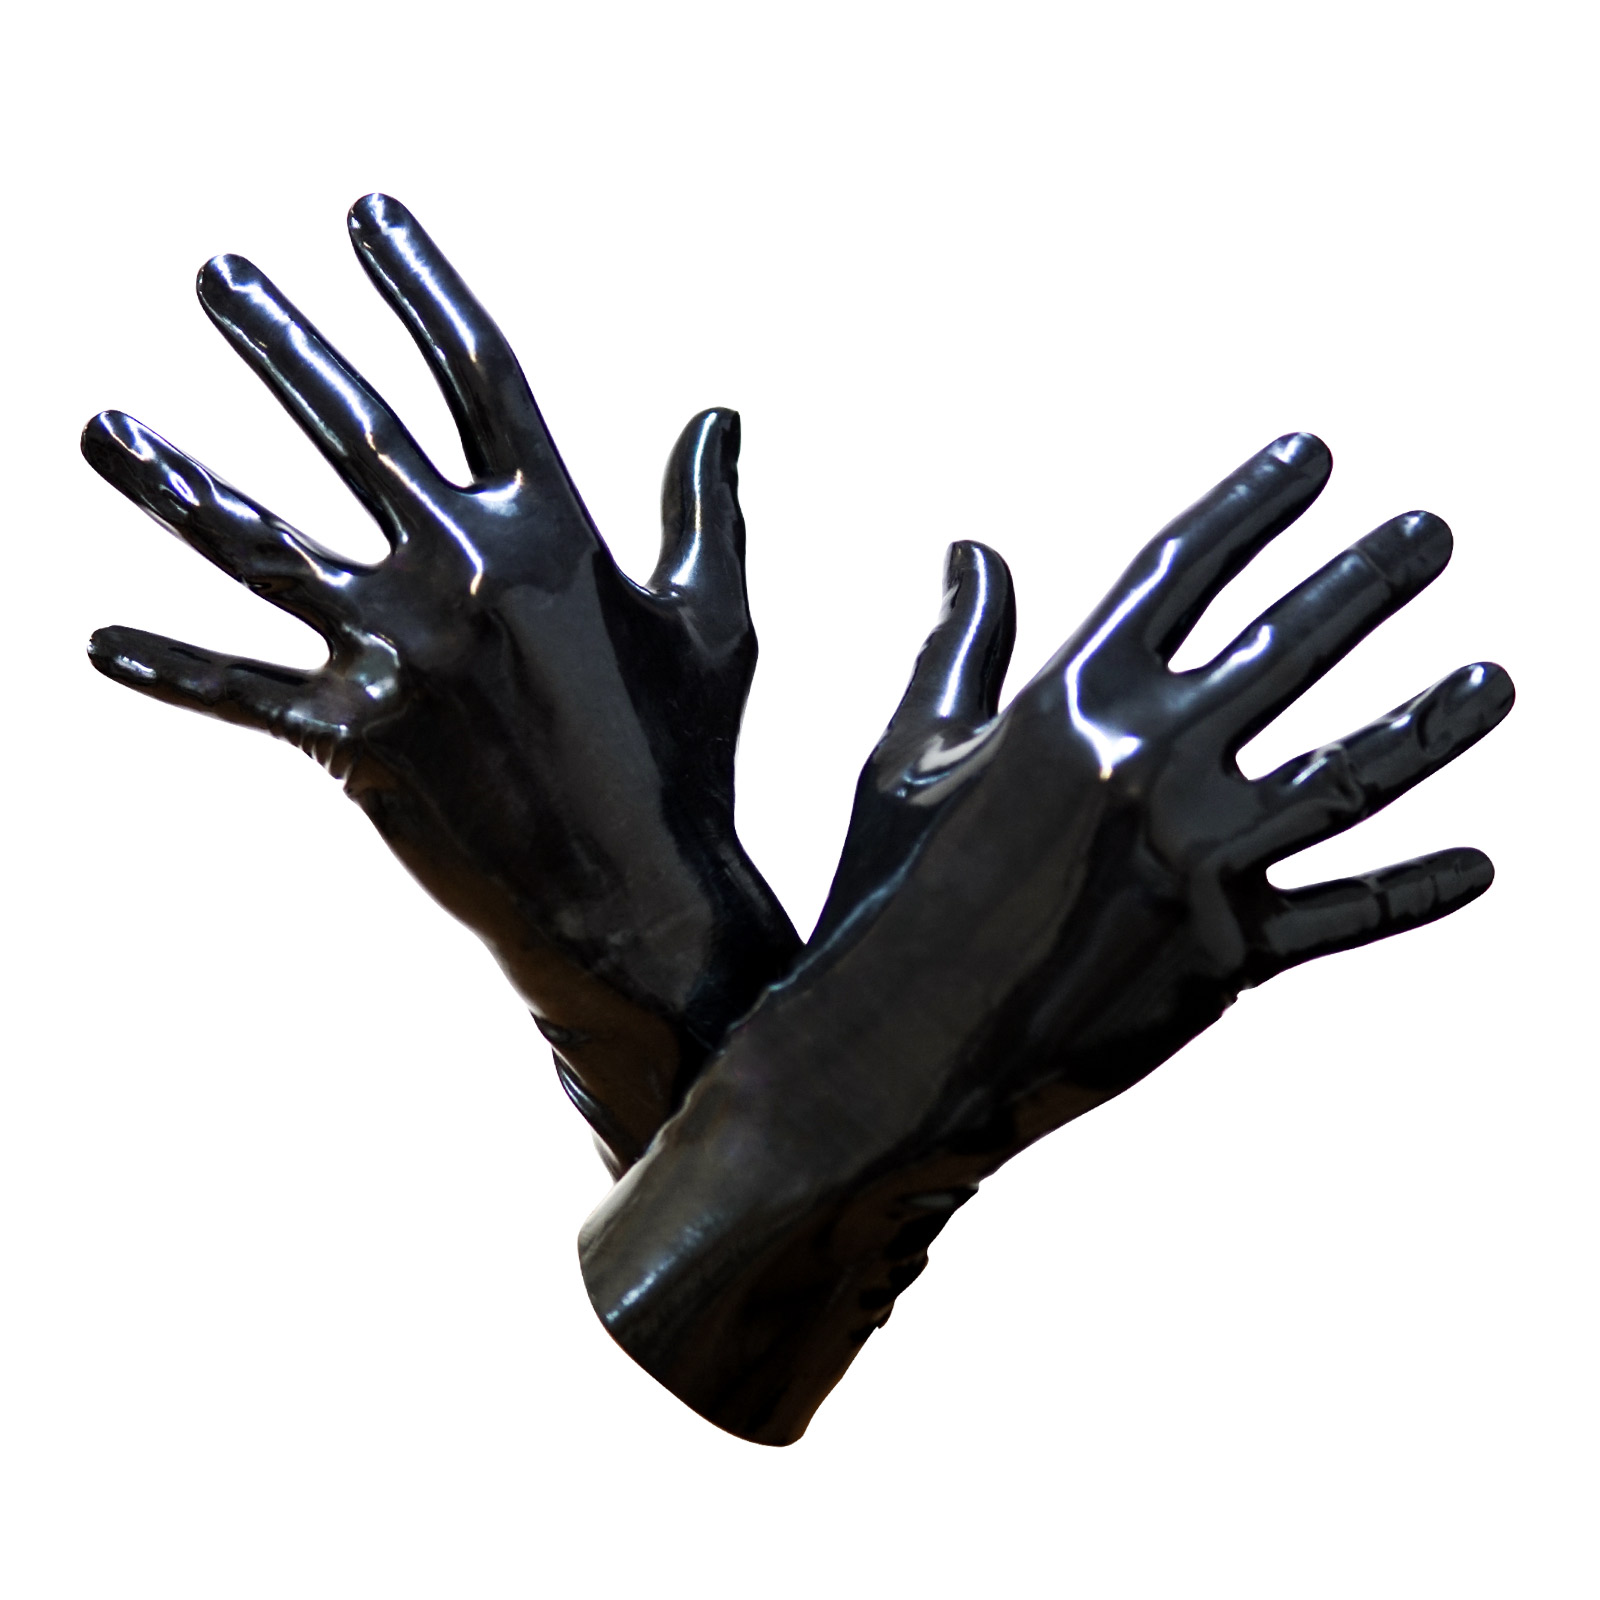 Toylie Latex Gloves «M» black, seamless, with excellent anatomic fit